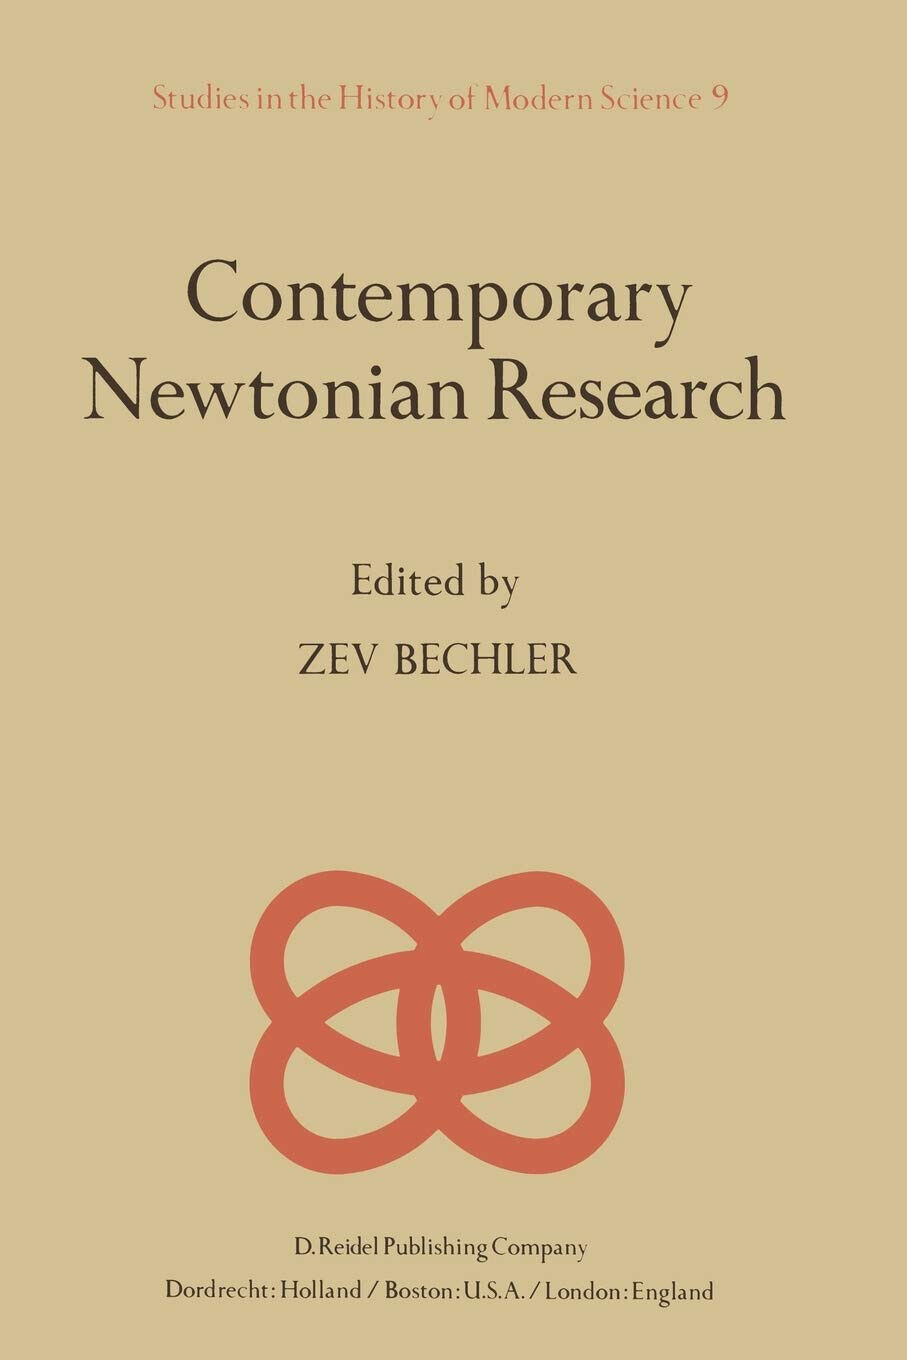 Contemporary Newtonian Research - Zev Bechler - Springer, 2013